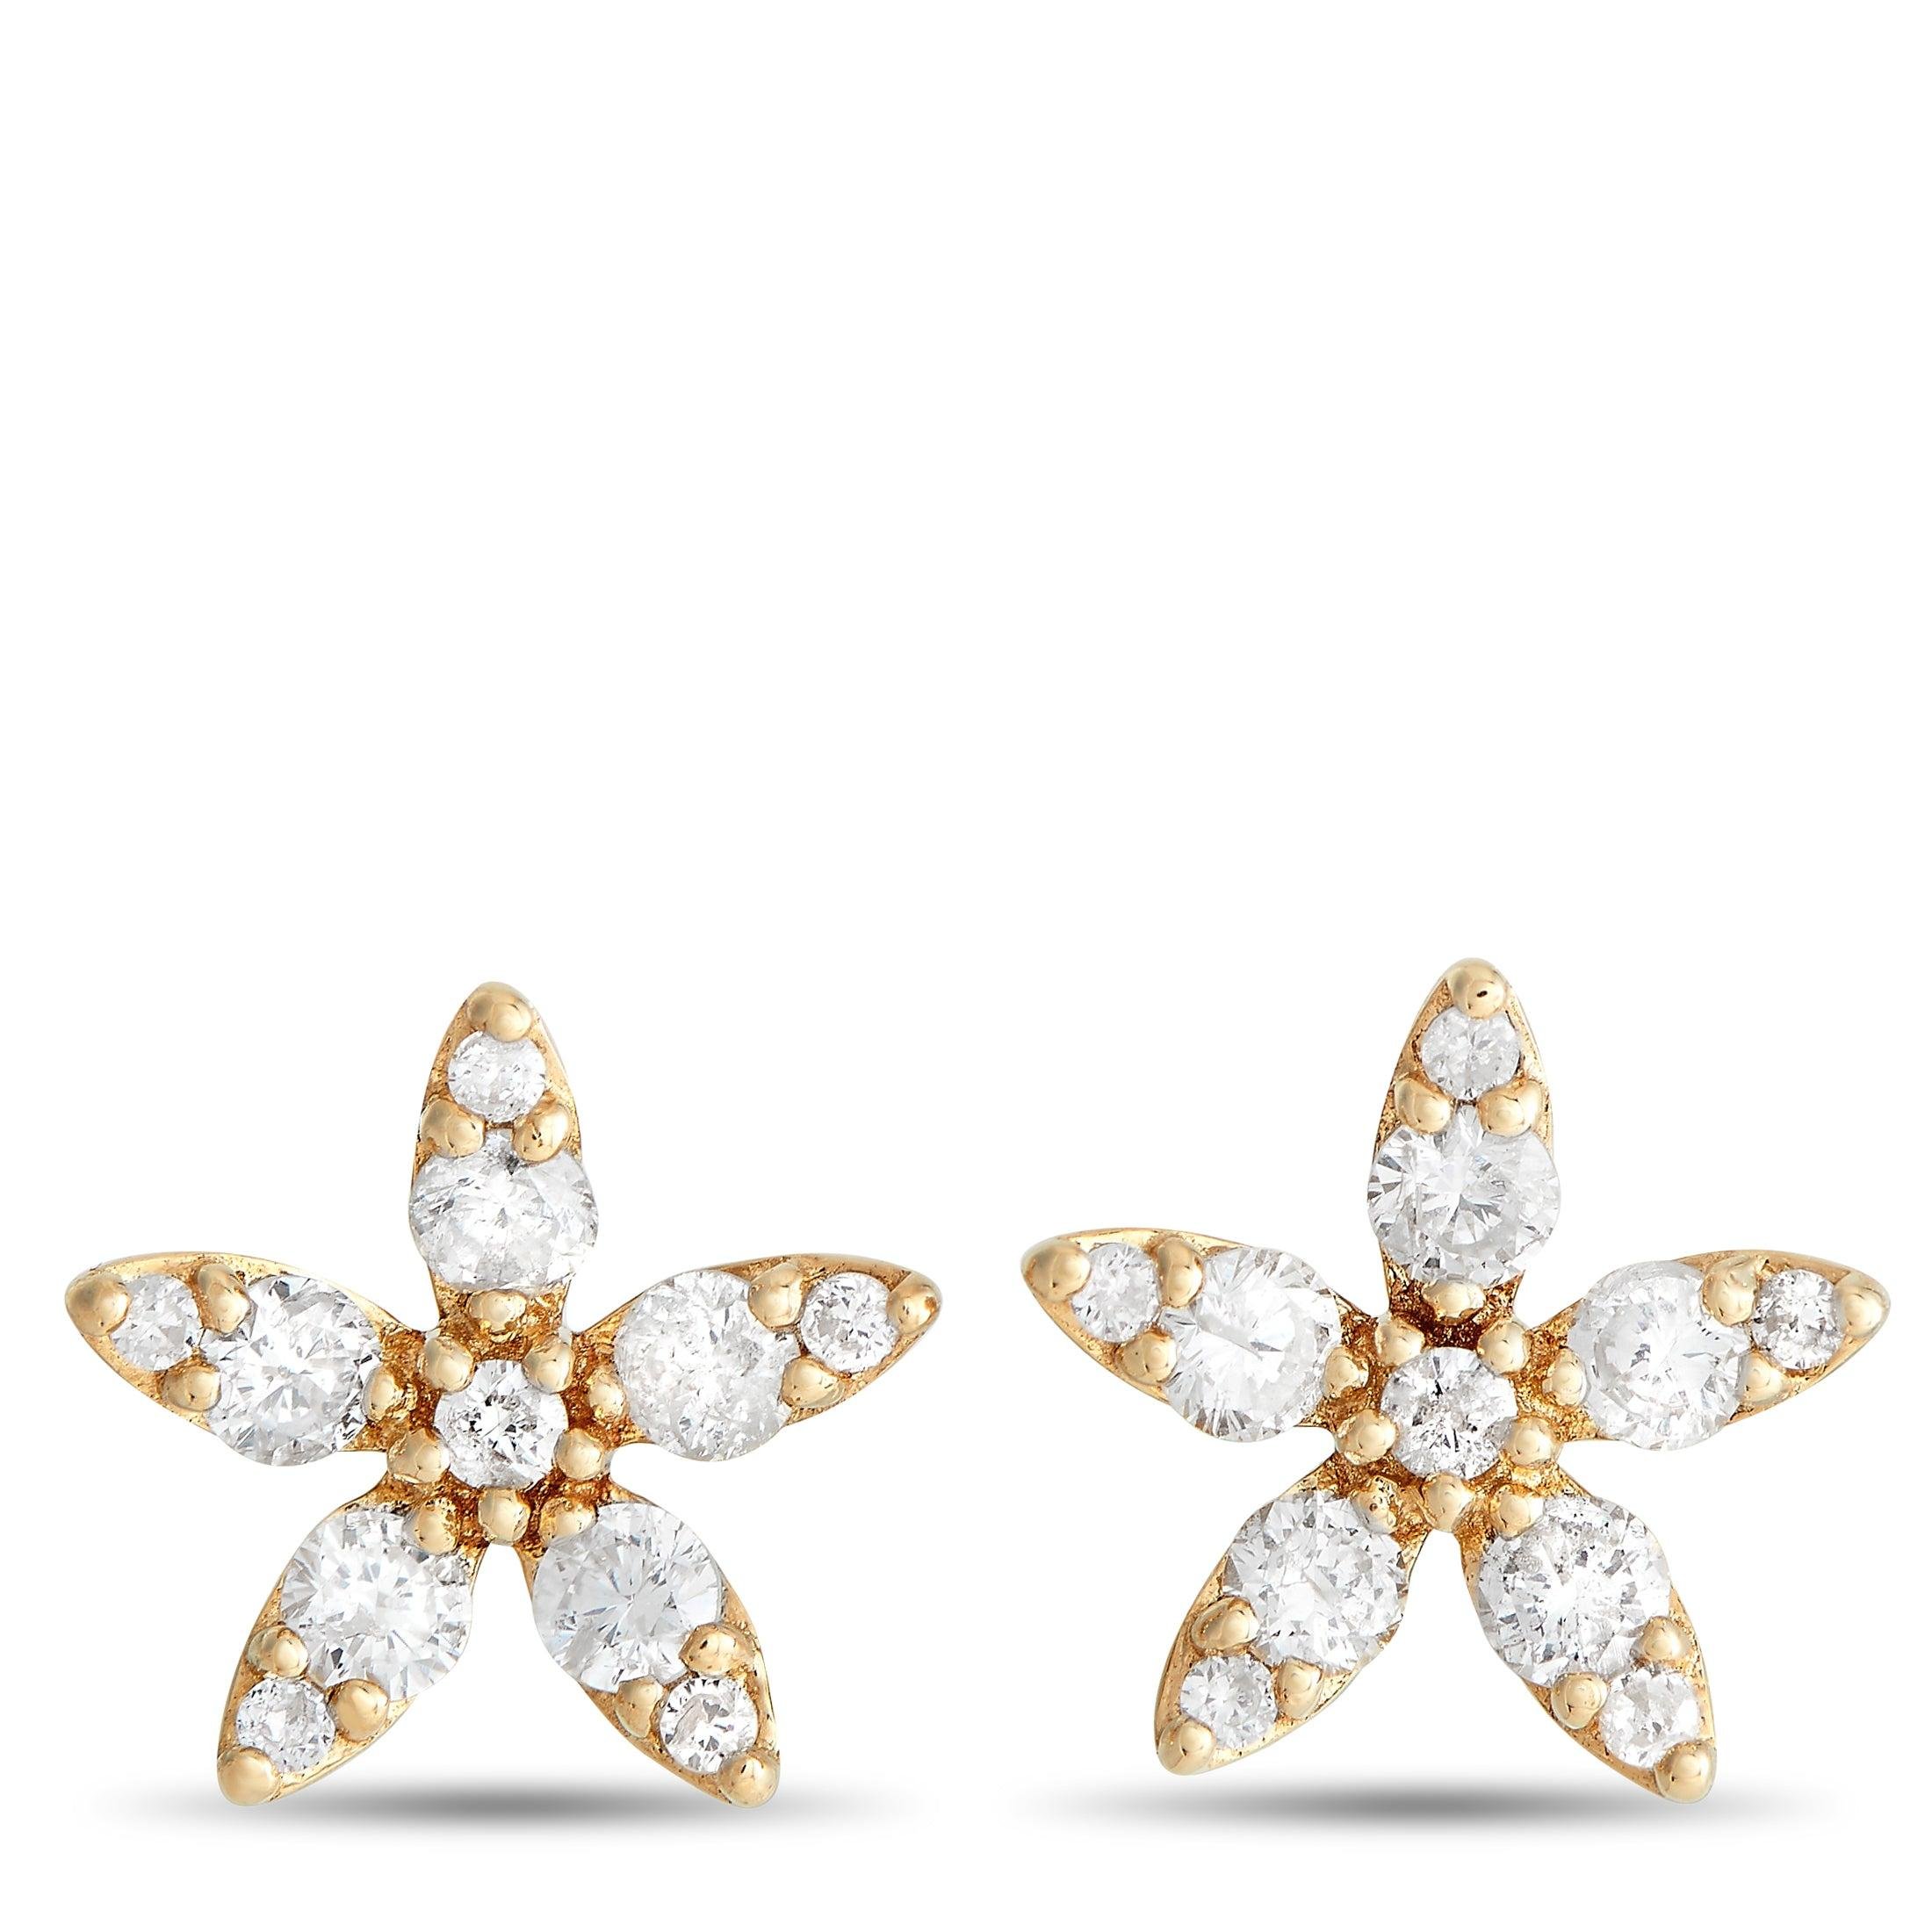 LB Exclusive 14K Yellow Gold 0.60ct Diamond Flower Earrings ER28577-Y by NON BRANDED